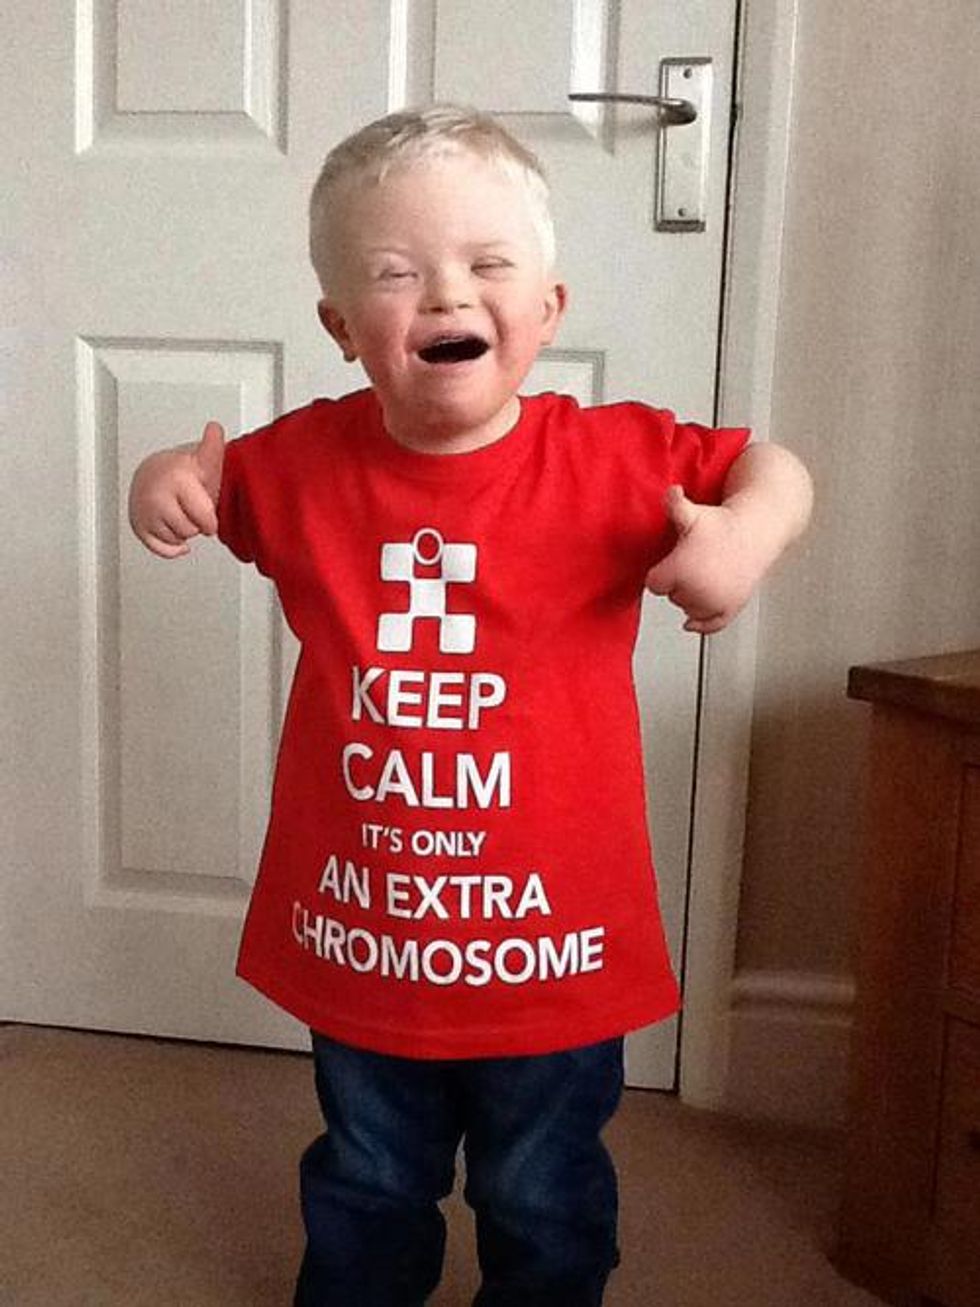 4 Things We Can Learn From People With An Extra Chromosome